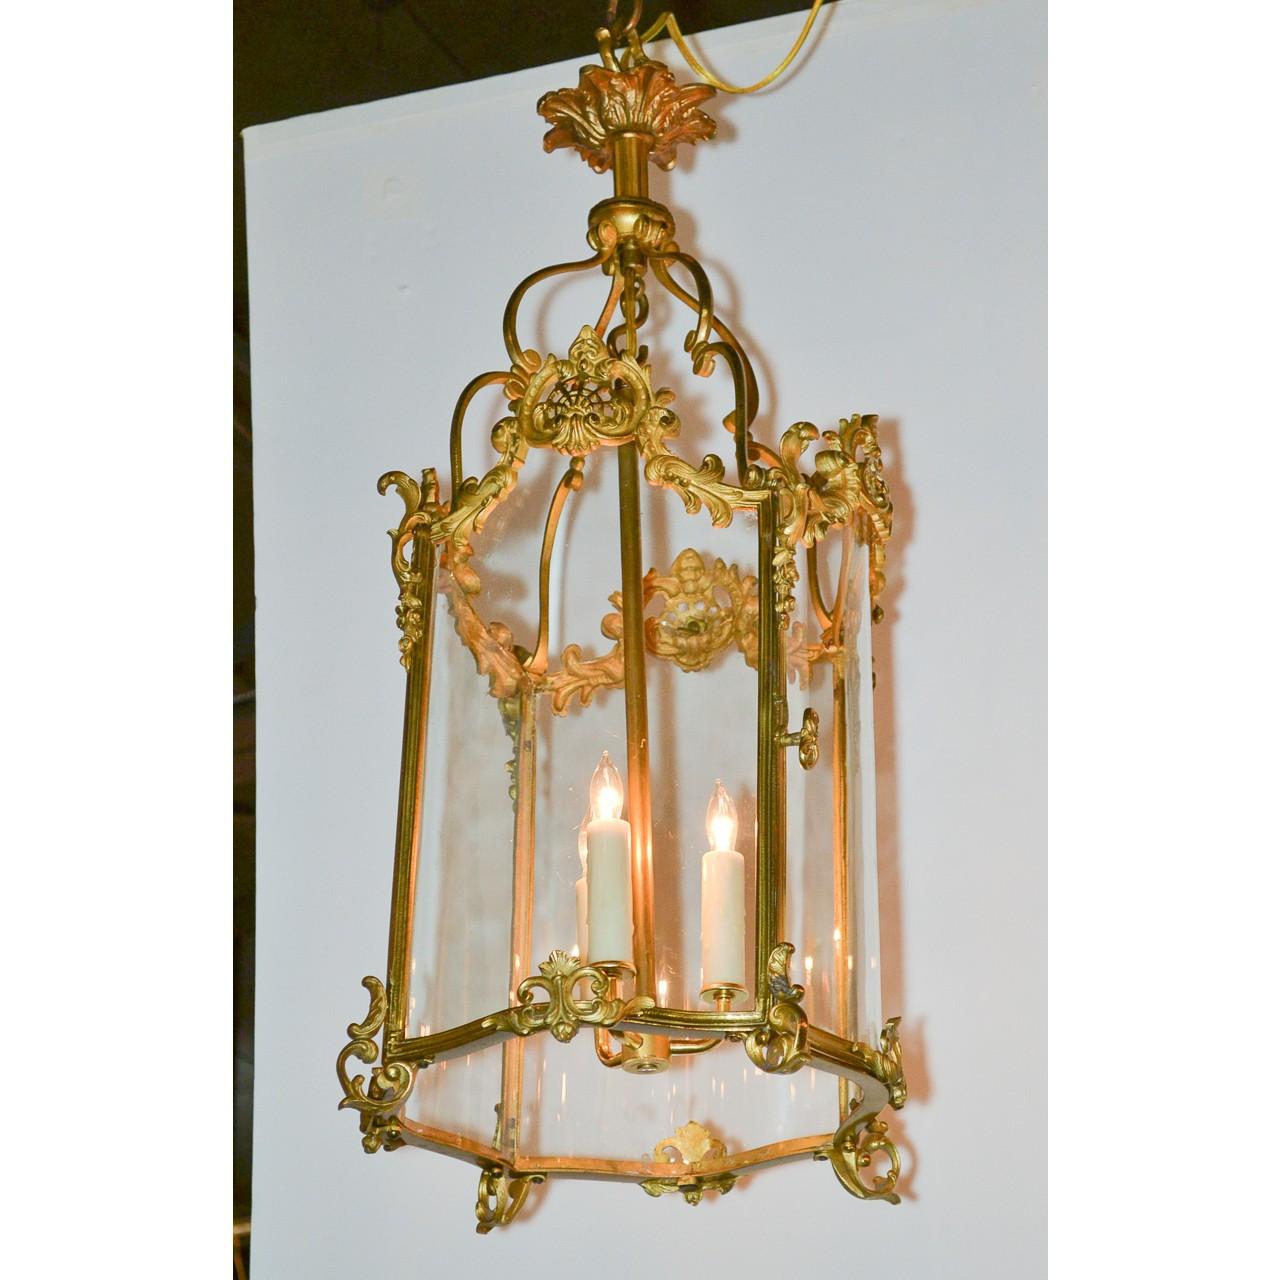 Splendid French Louis XV style gilt bronze and shaped glass hall, alcove, or entry lantern. Decorated with finely detailed gold-gilded bronze foliate swags and accented with acanthus leaves and shells. Beautiful leaf-spray bronze canopy,

circa